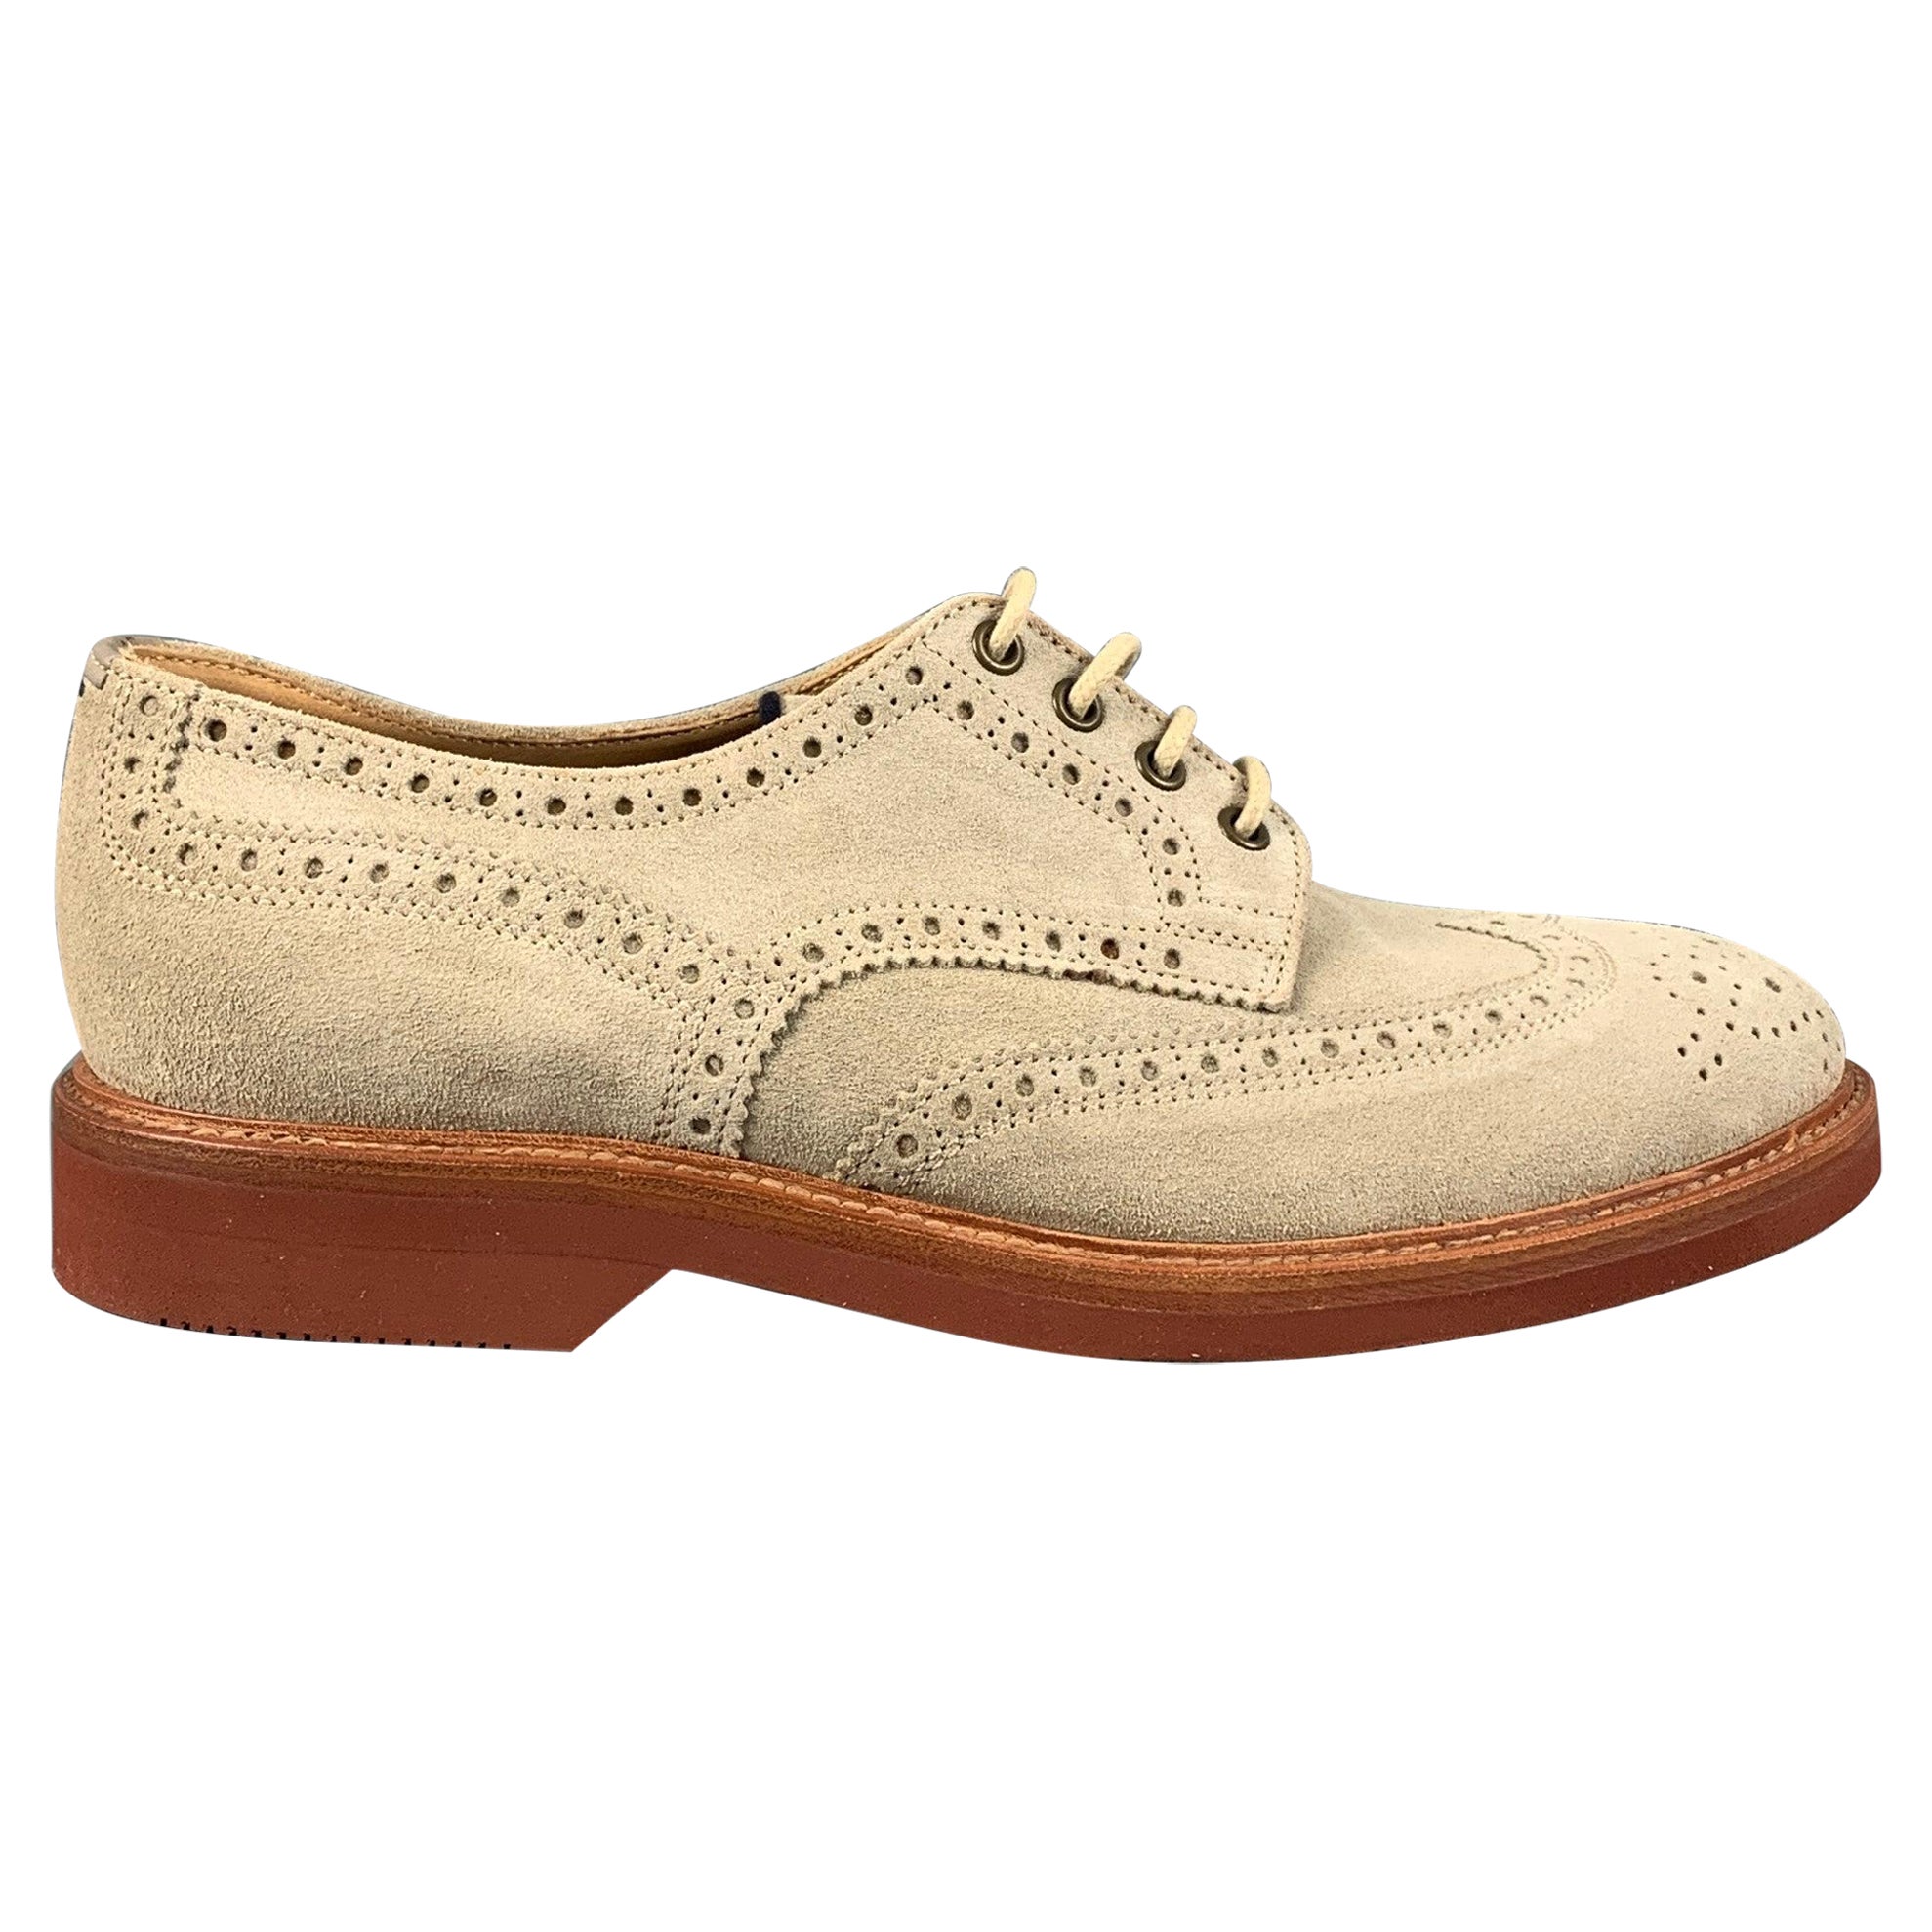 BRUNELLO CUCINELLI Size 9.5 Beige Brown Wingtip Brogue Lace Up Shoes For Sale